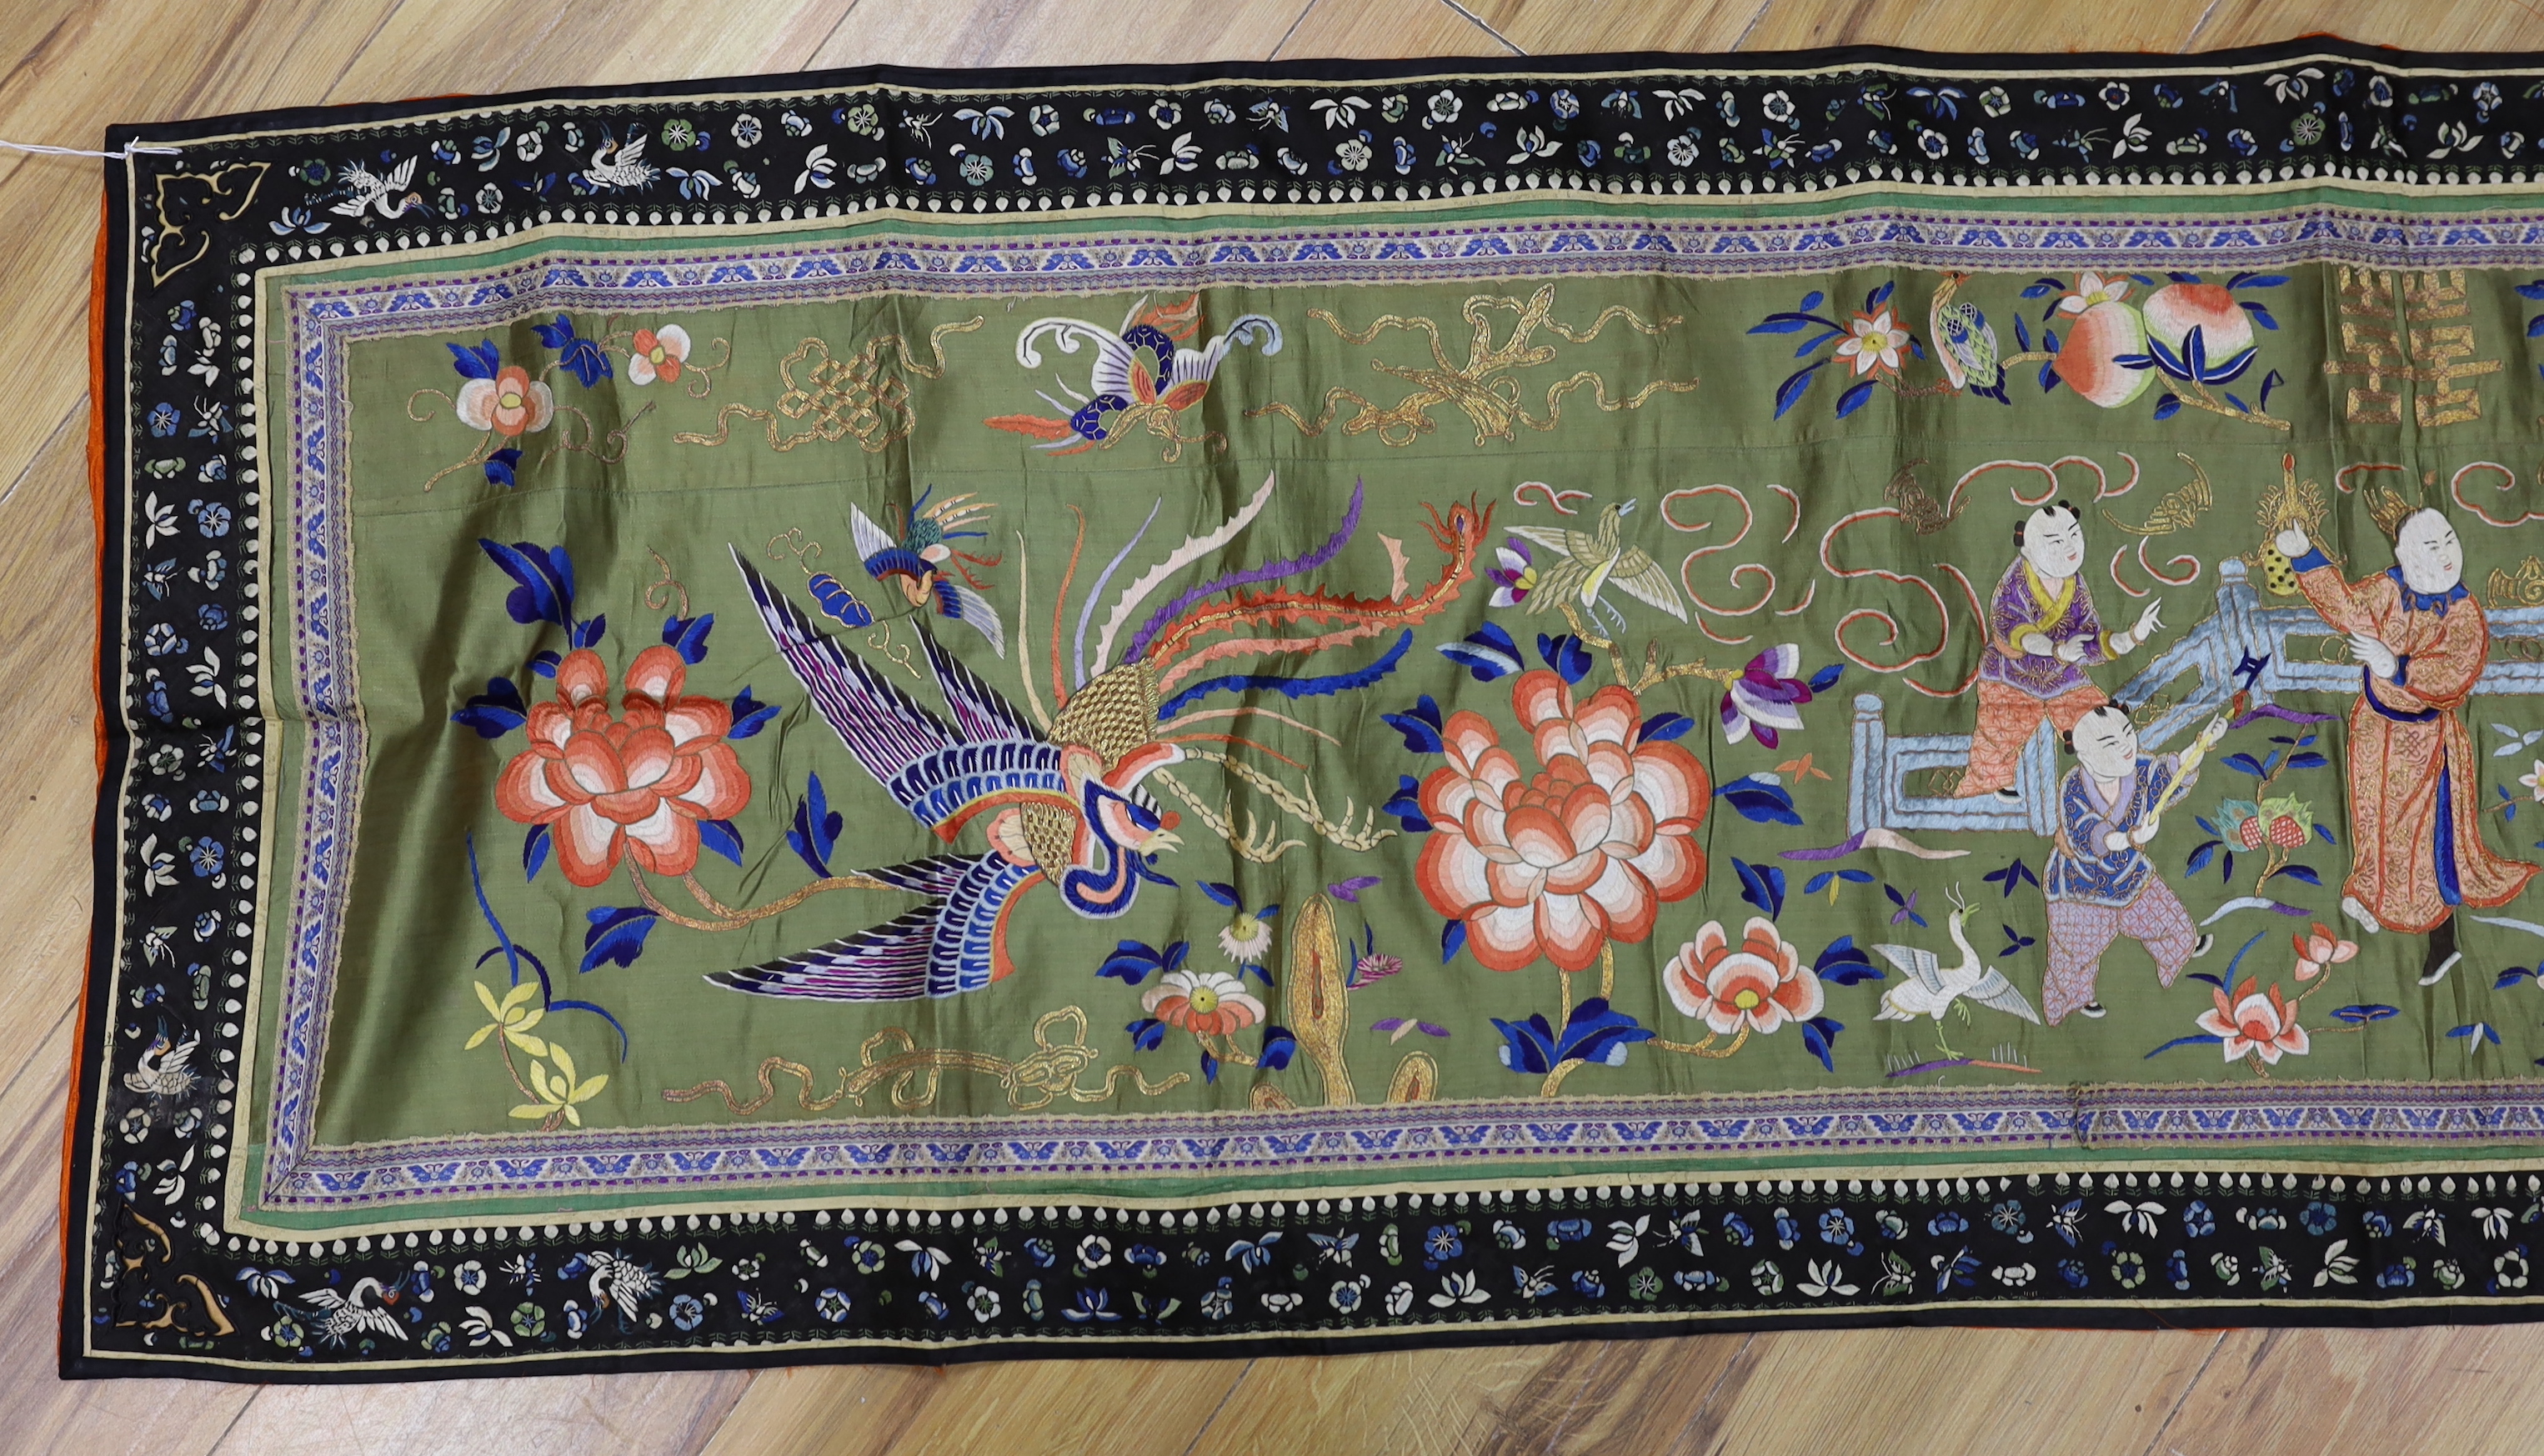 A long Chinese silk embroidered runner embroidered with the figure of Fu and boys, symbolic peaches, phoenix and flowers, possibly an altar cloth together with two other smaller runners, largest runner 202cm long x 55cm